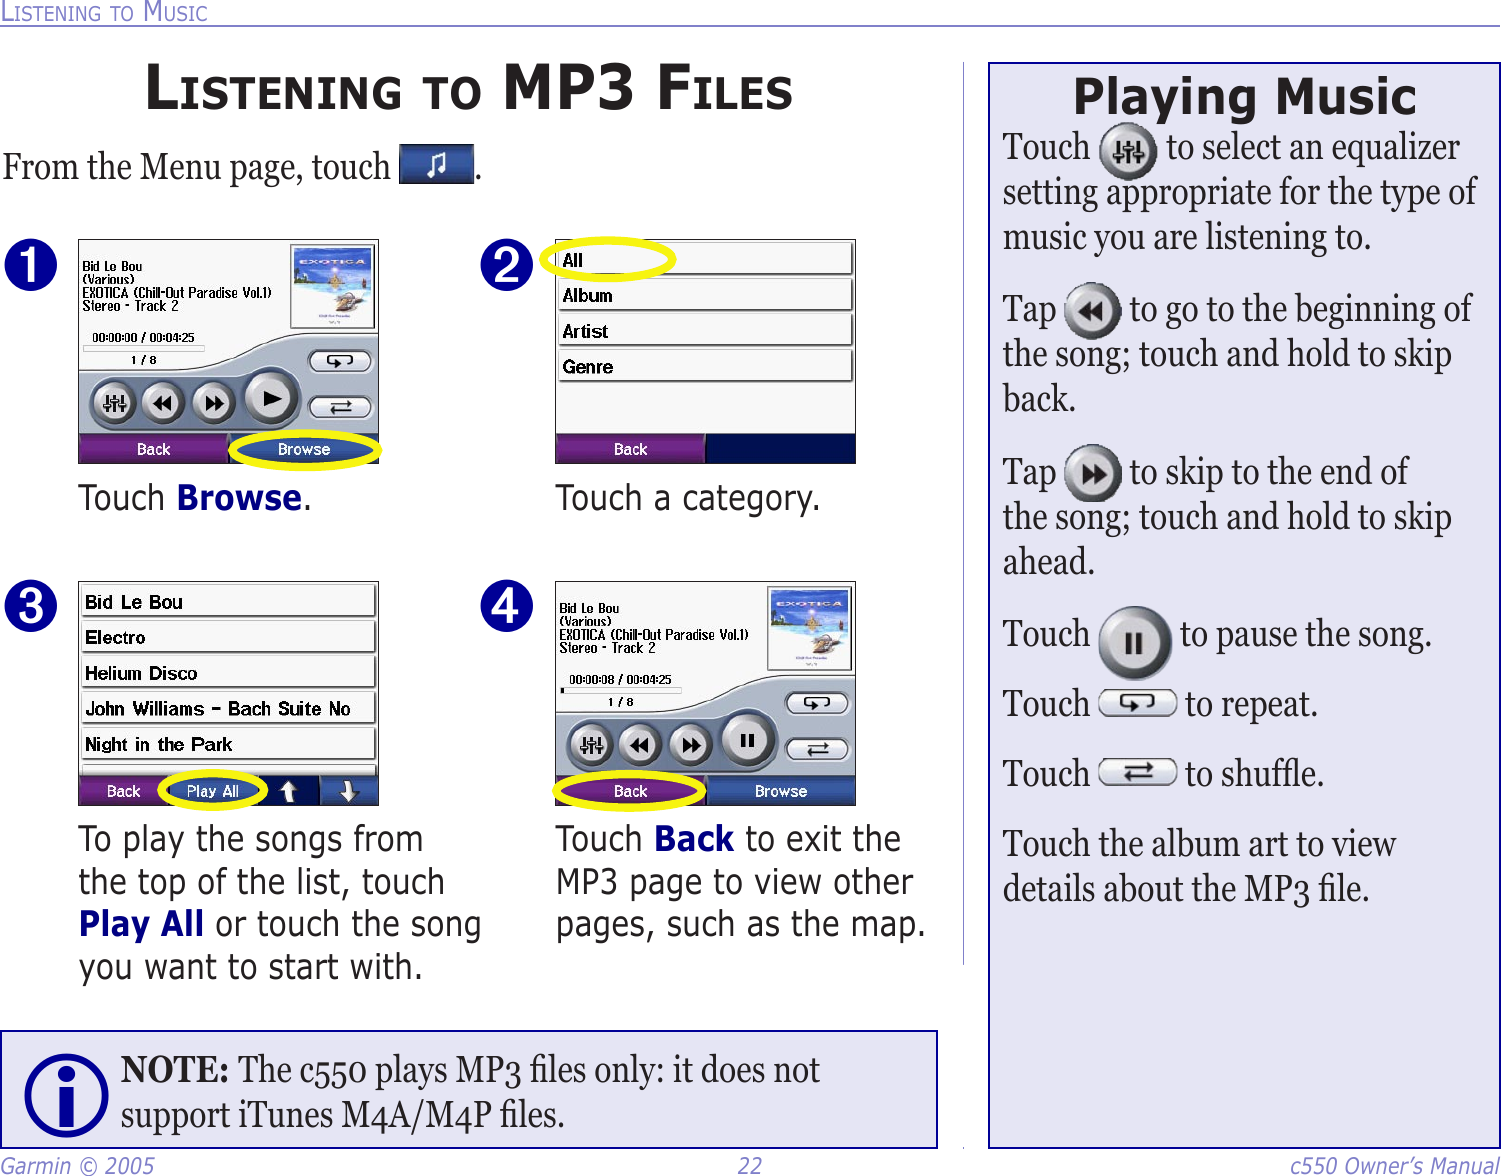 Garmin © 2005  22  c550 Owner’s ManualLISTENING TO MUSICLISTENING TO MP3 FILESFrom the Menu page, touch  .Touch Back to exit the MP3 page to view other pages, such as the map. ➍To play the songs from the top of the list, touch Play All or touch the song you want to start with.➌Touch a category. ➋Touch Browse.➊Playing MusicTouch   to select an equalizer setting appropriate for the type of music you are listening to. Tap   to go to the beginning of the song; touch and hold to skip back. Tap   to skip to the end of the song; touch and hold to skip ahead. Touch   to pause the song. Touch   to repeat. Touch   to shufﬂe. Touch the album art to view details about the MP3 ﬁle. NOTE: The c550 plays MP3 ﬁles only: it does not support iTunes M4A/M4P ﬁles. 